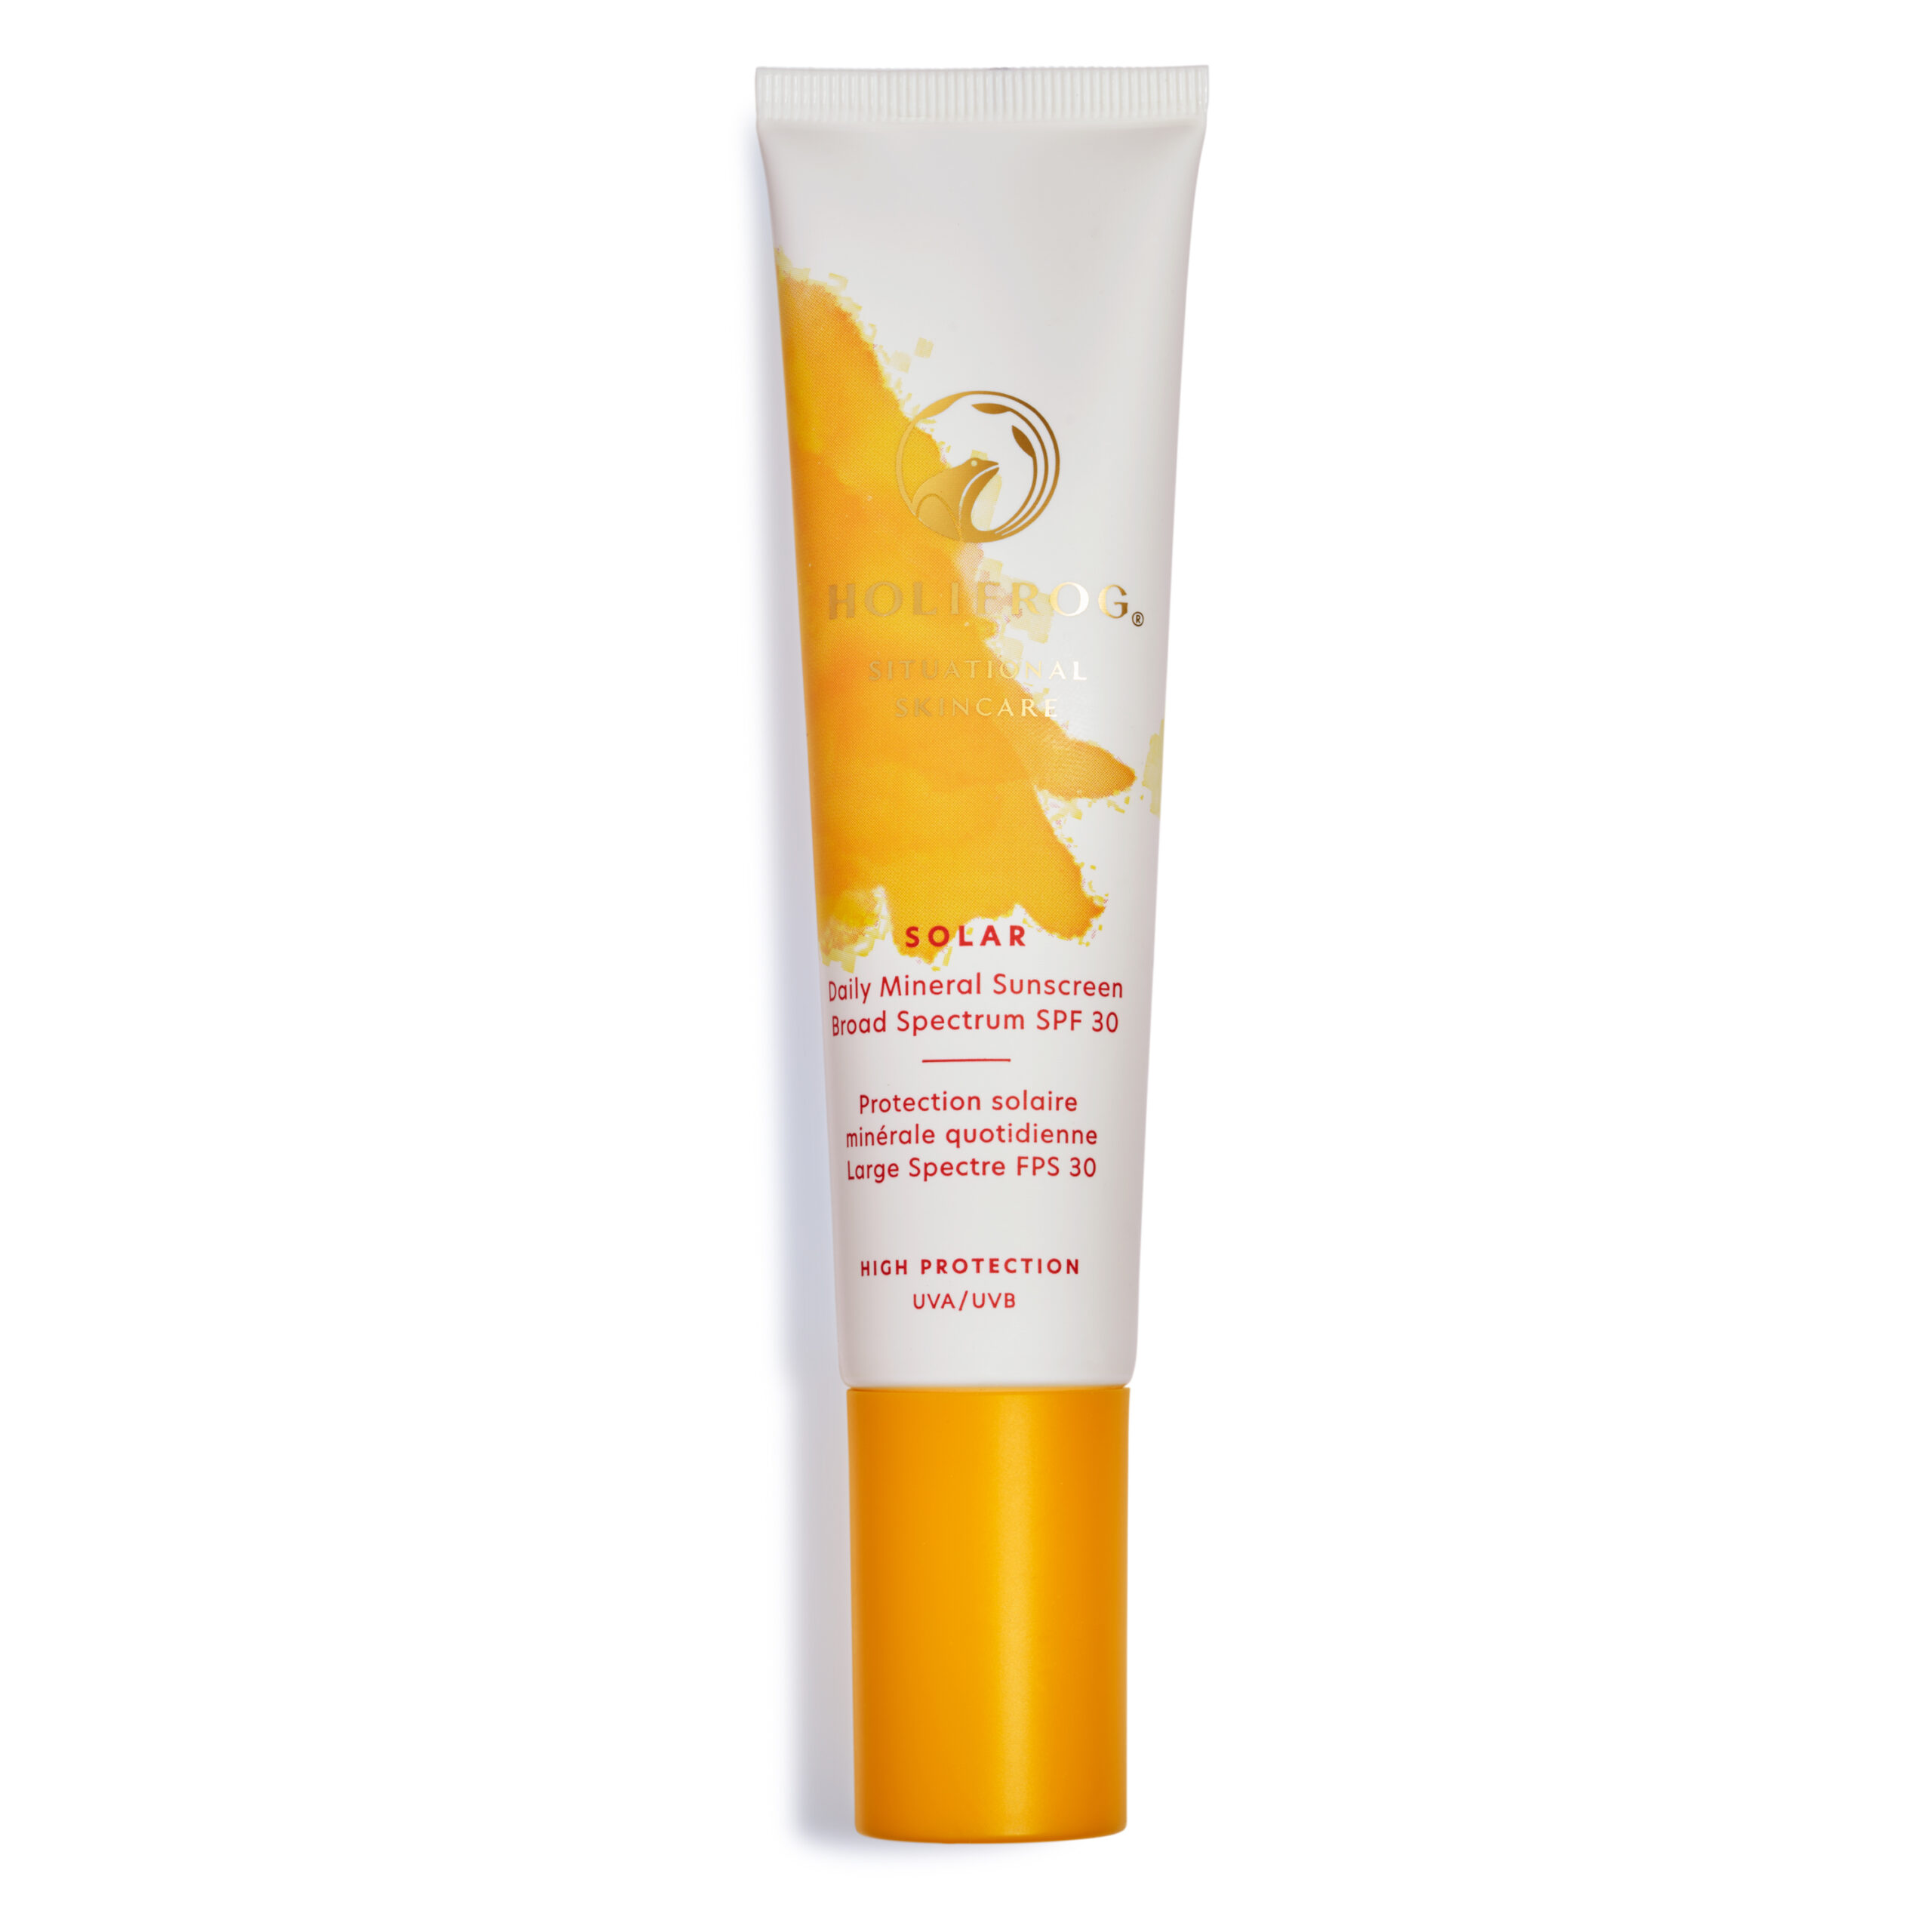 Bottle of Holifrog Solar Daily Mineral Sunscreen Broad Spectrum SPF 30